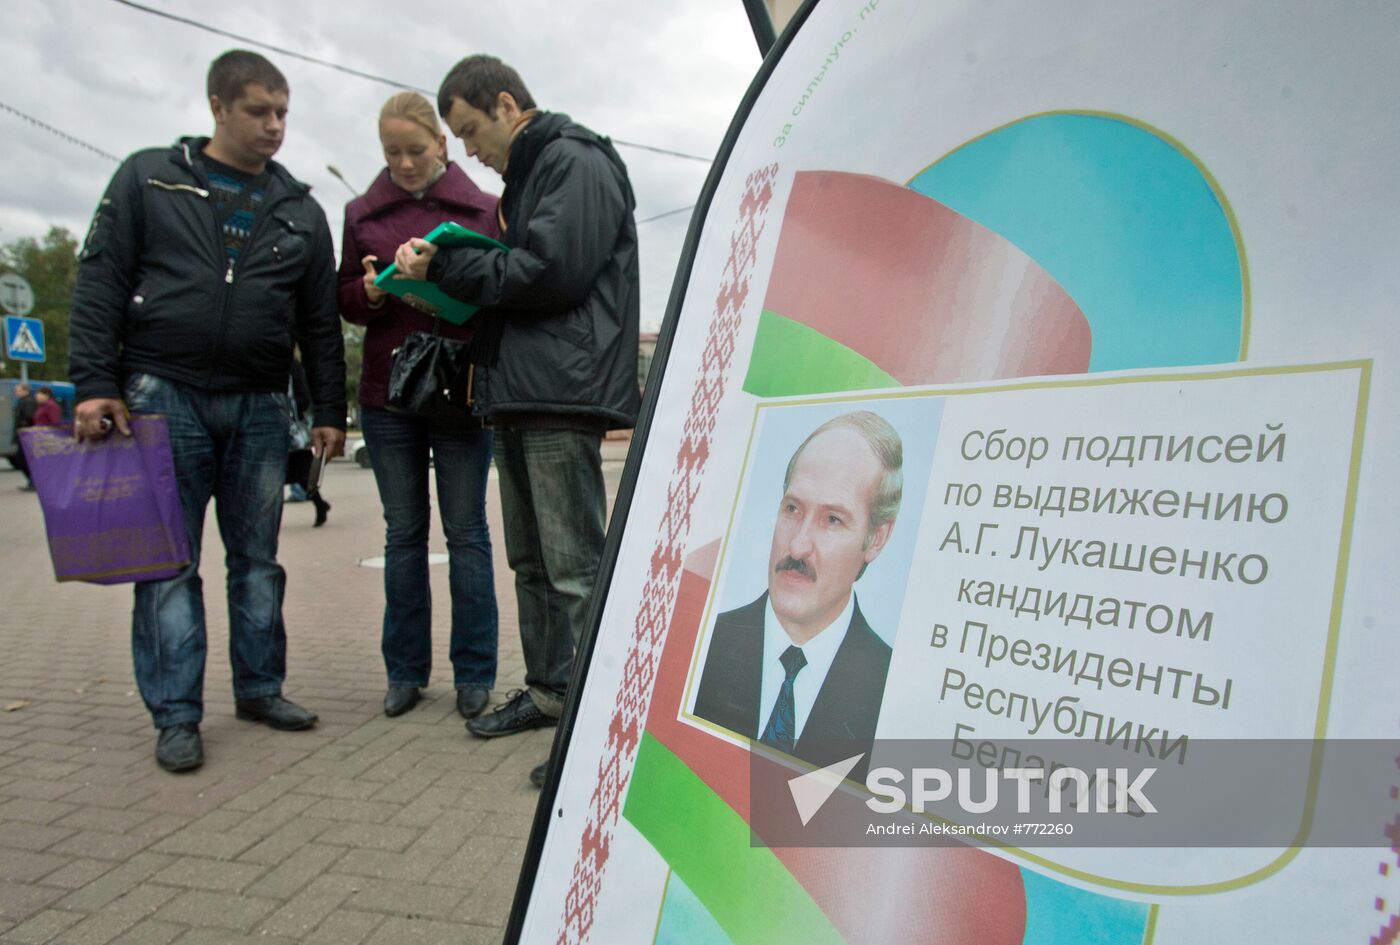 Collecting signatures for Alexander Lukashenko